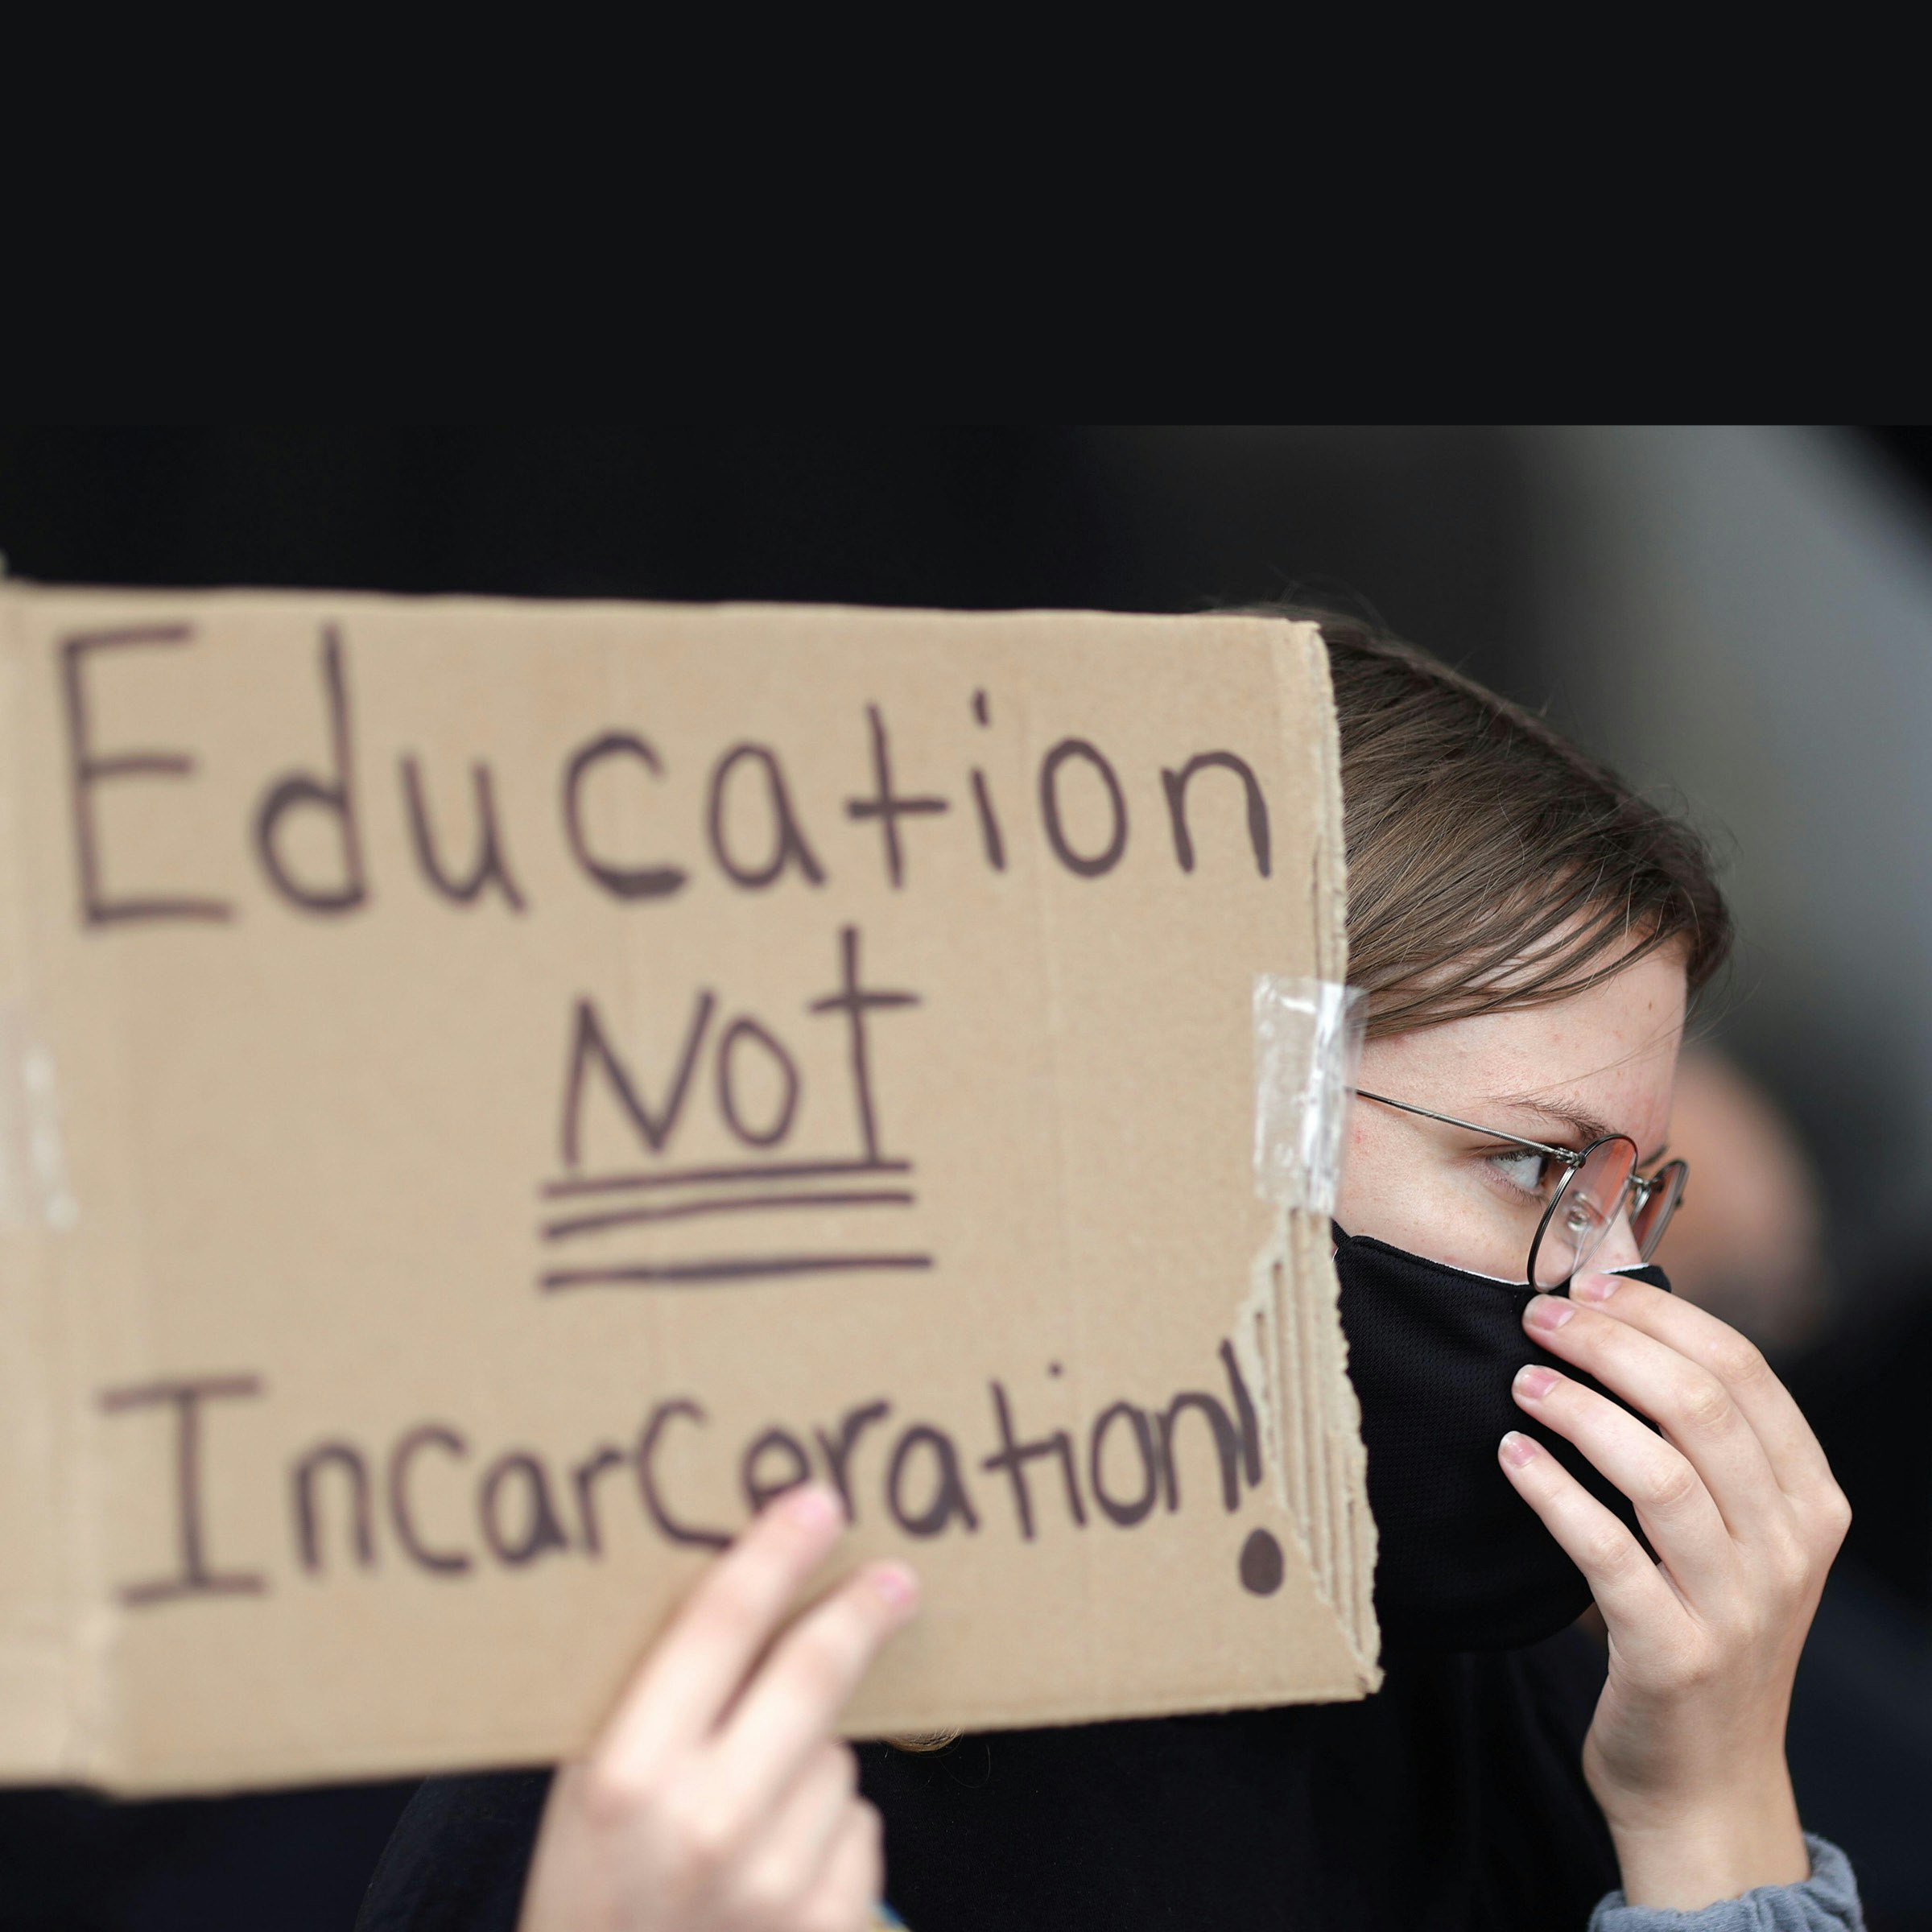 A person holds a placard that reads "Education NOT Incarceration"